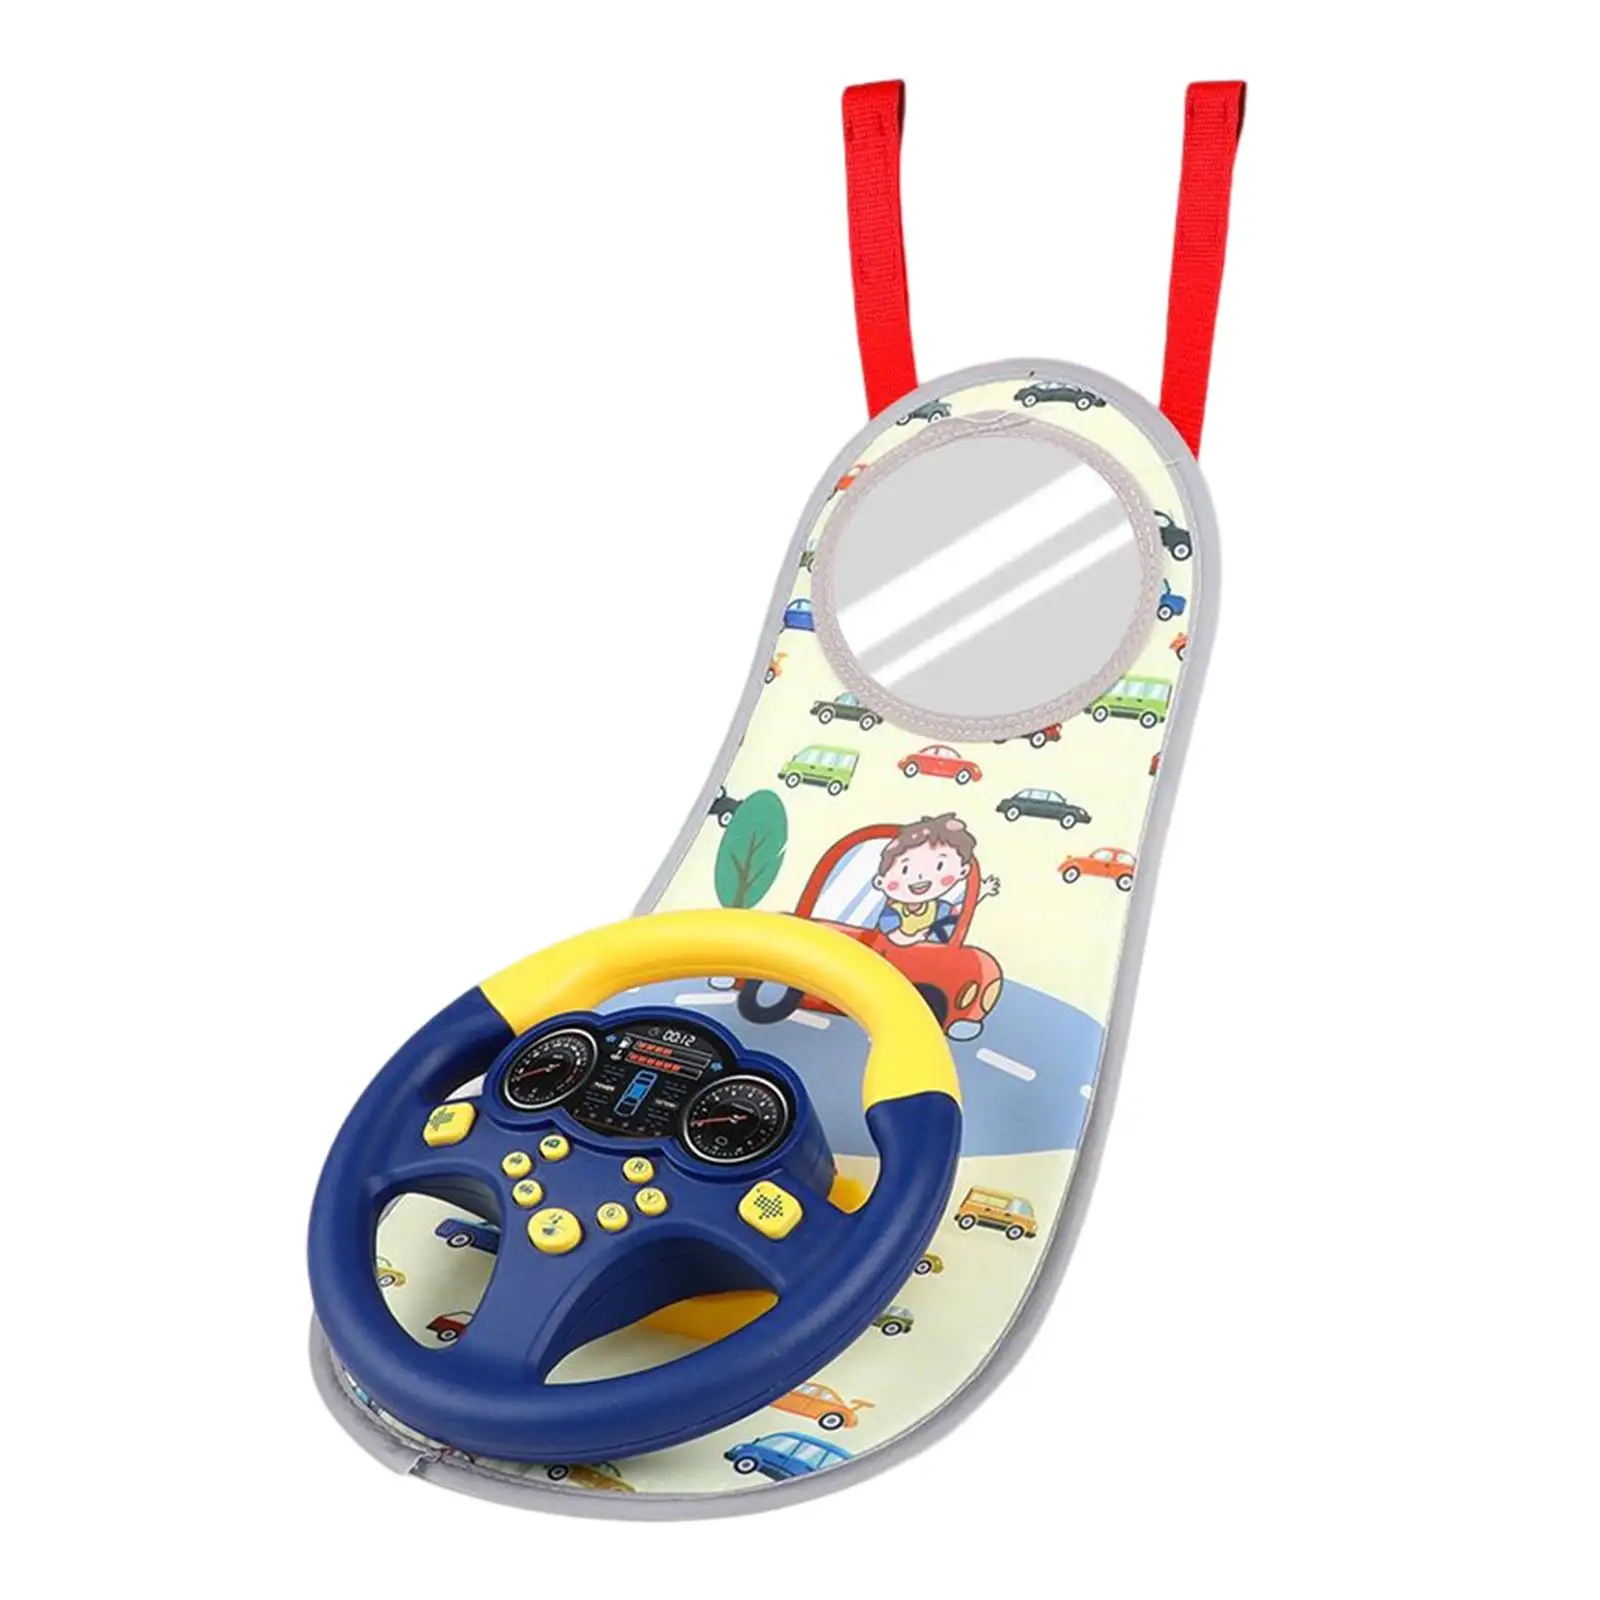 Carseat Toys Steering Wheel Musical Activity Play Center Toy Car Seat Toys with Mirror for Girls Boys